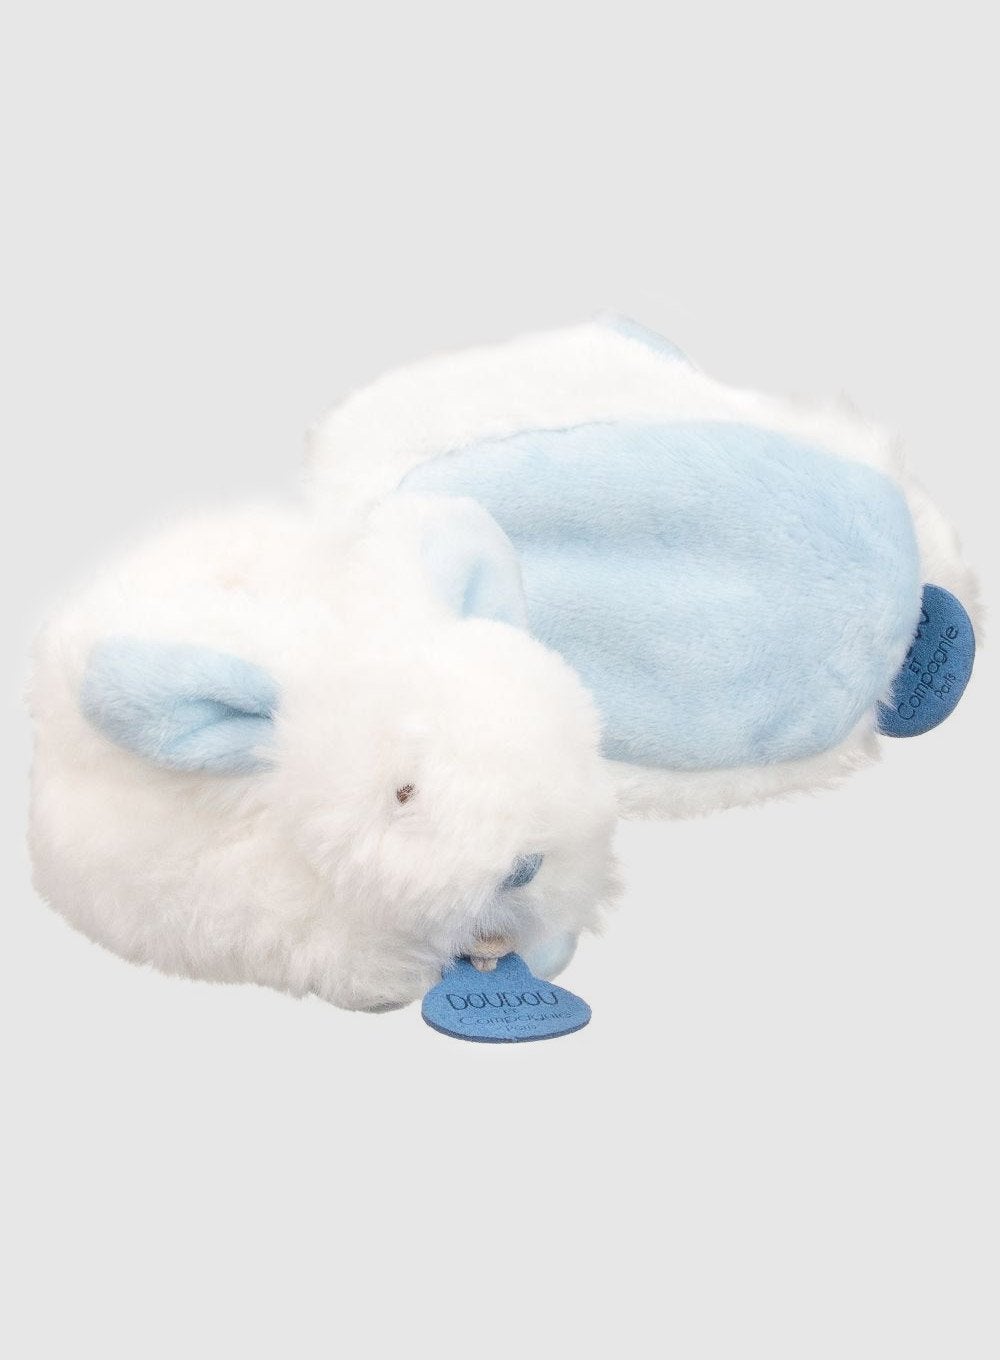 Doudou et Compagnie Booties Little Bunny Booties in Blue - Trotters Childrenswear